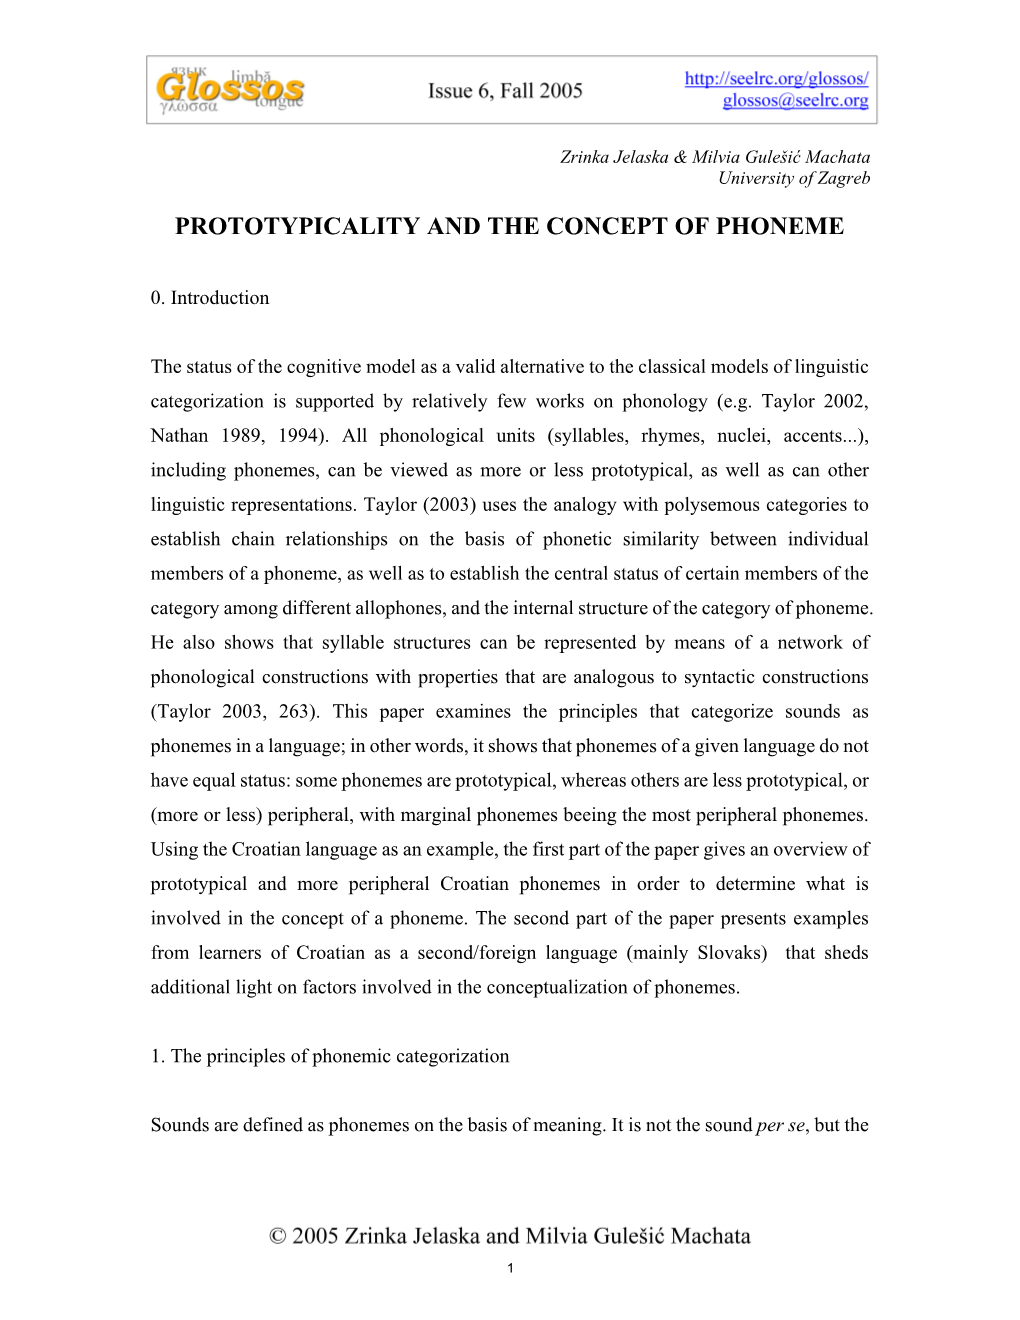 Prototypicality and the Concept of Phoneme